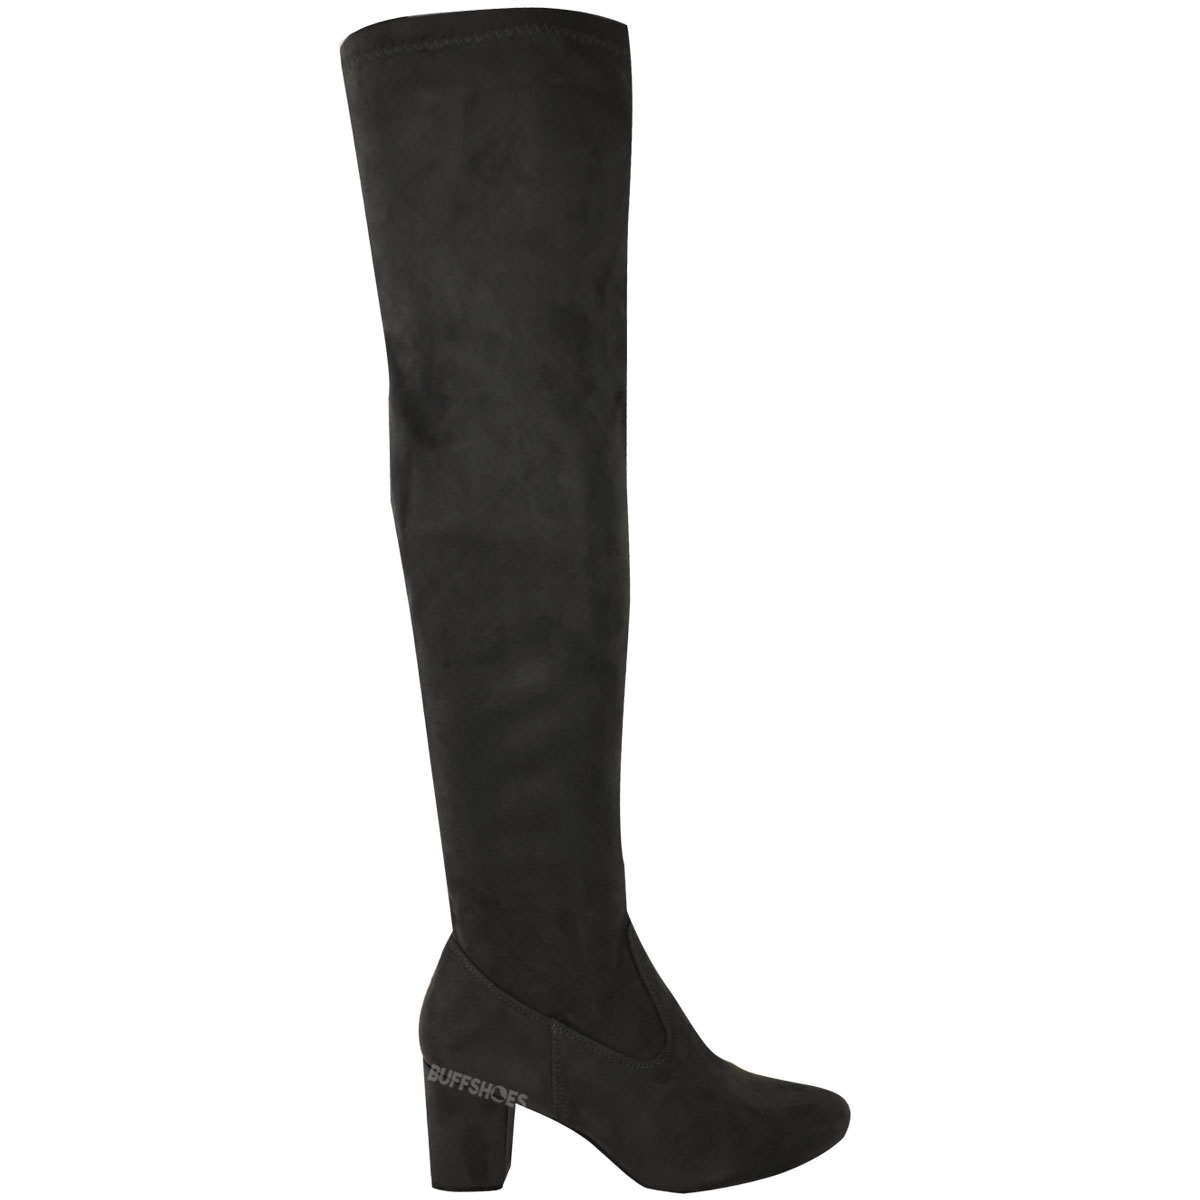 WOMENS LADIES OVER THE KNEE THIGH HIGH LOW BLOCK HEELS BOOTS WORK ...